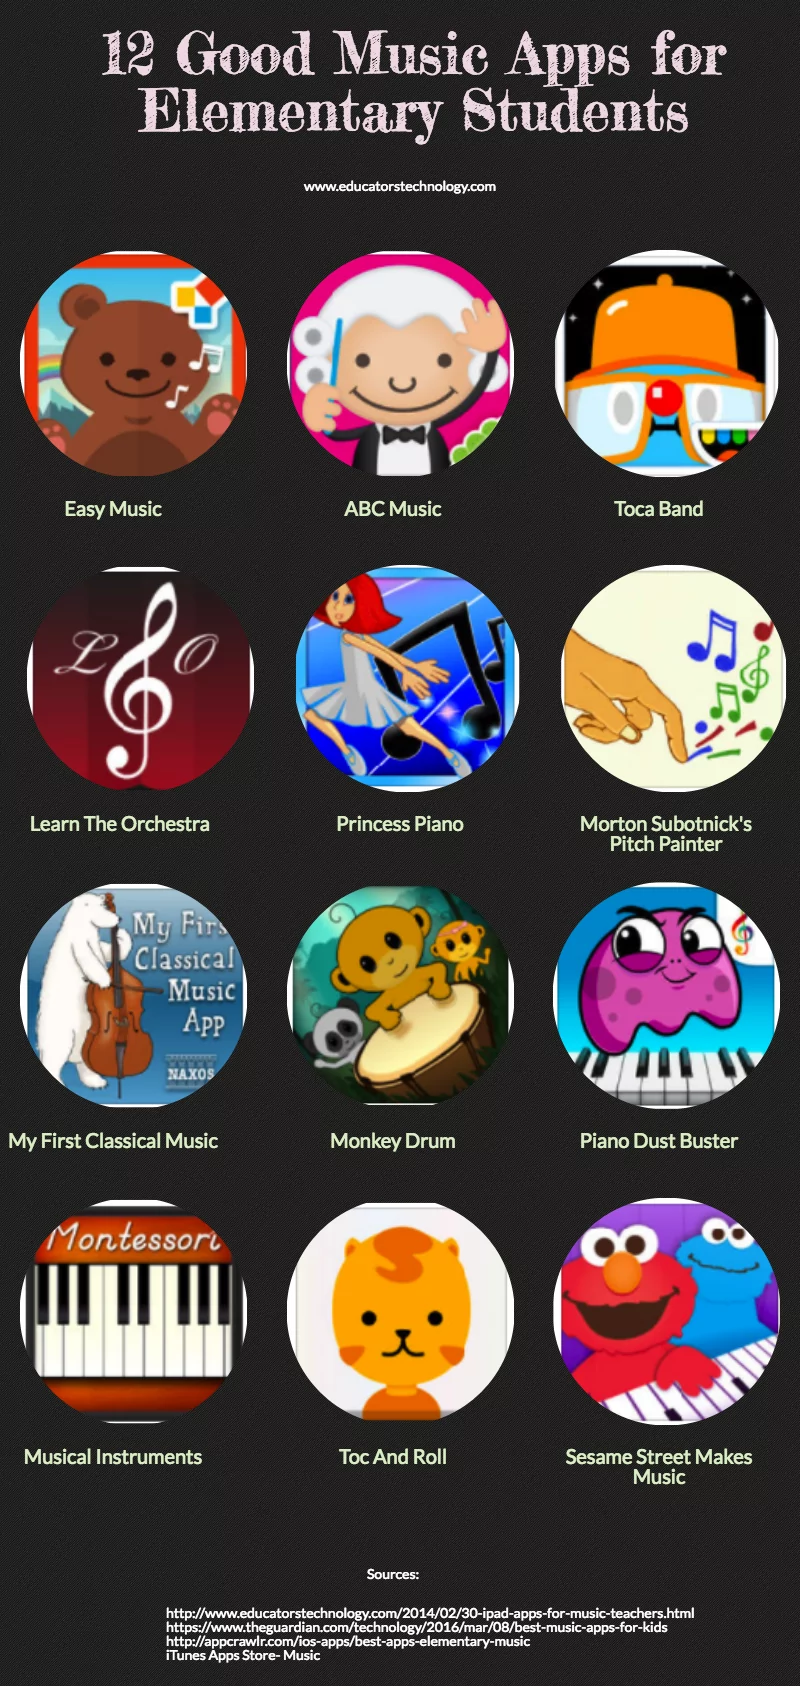 12 Good Music Apps for Elementary Students